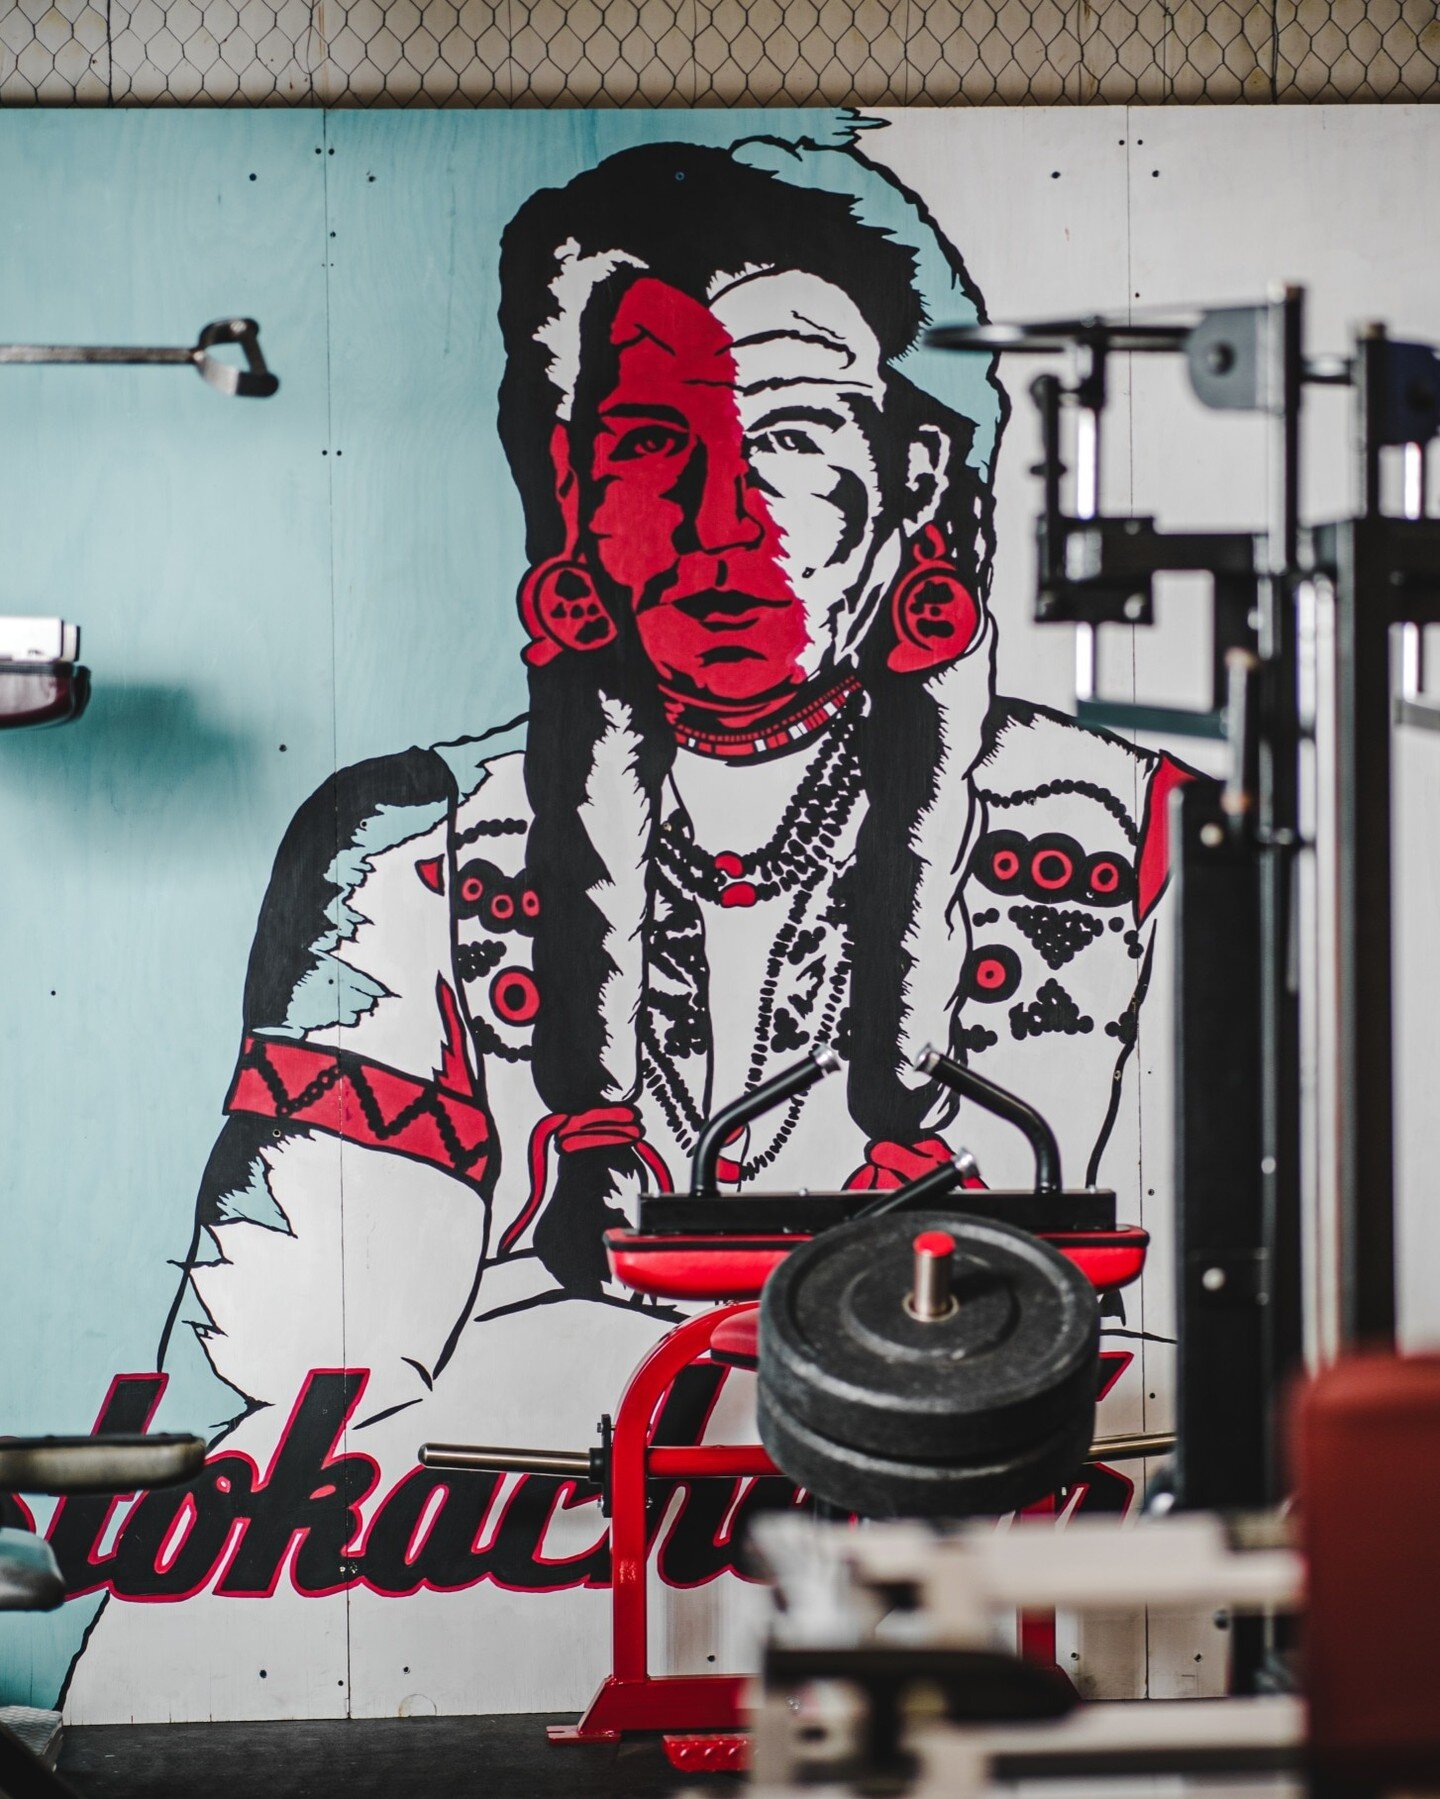 The Pistokache Gym is for those who believe that they firmly hold the power to transcend their current realities through extreme work ethic and unwavering faith.⁣

Anyone who believes that solely inborn traits (𝘴𝘰𝘤𝘪𝘢𝘭 𝘤𝘭𝘢𝘴𝘴, 𝘨𝘦𝘯𝘦𝘵𝘪𝘤